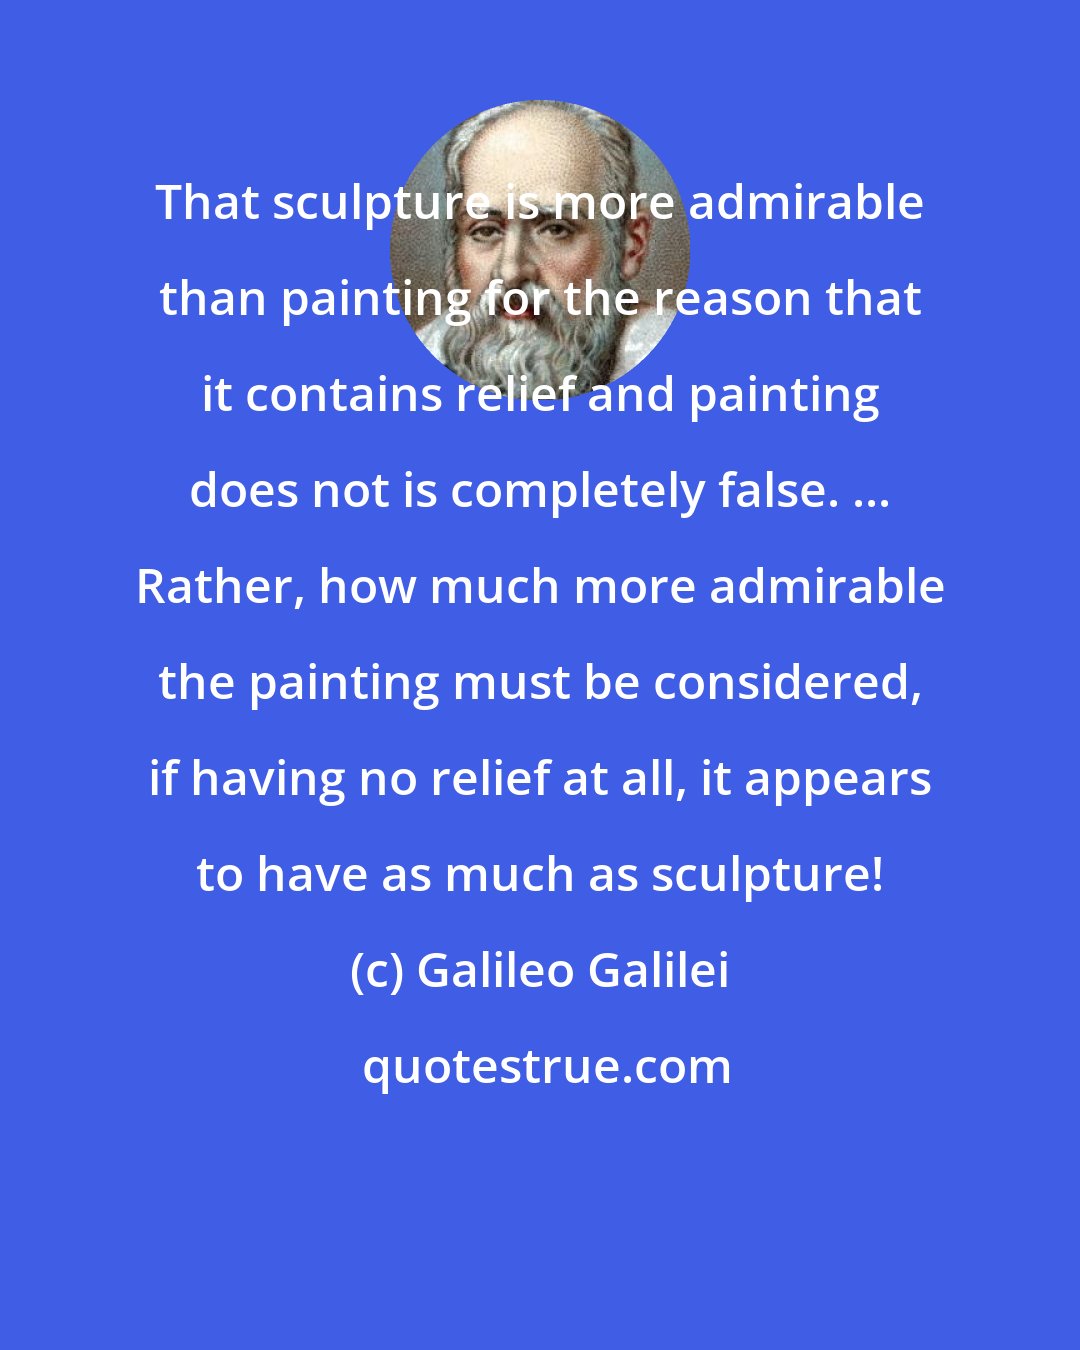 Galileo Galilei: That sculpture is more admirable than painting for the reason that it contains relief and painting does not is completely false. ... Rather, how much more admirable the painting must be considered, if having no relief at all, it appears to have as much as sculpture!